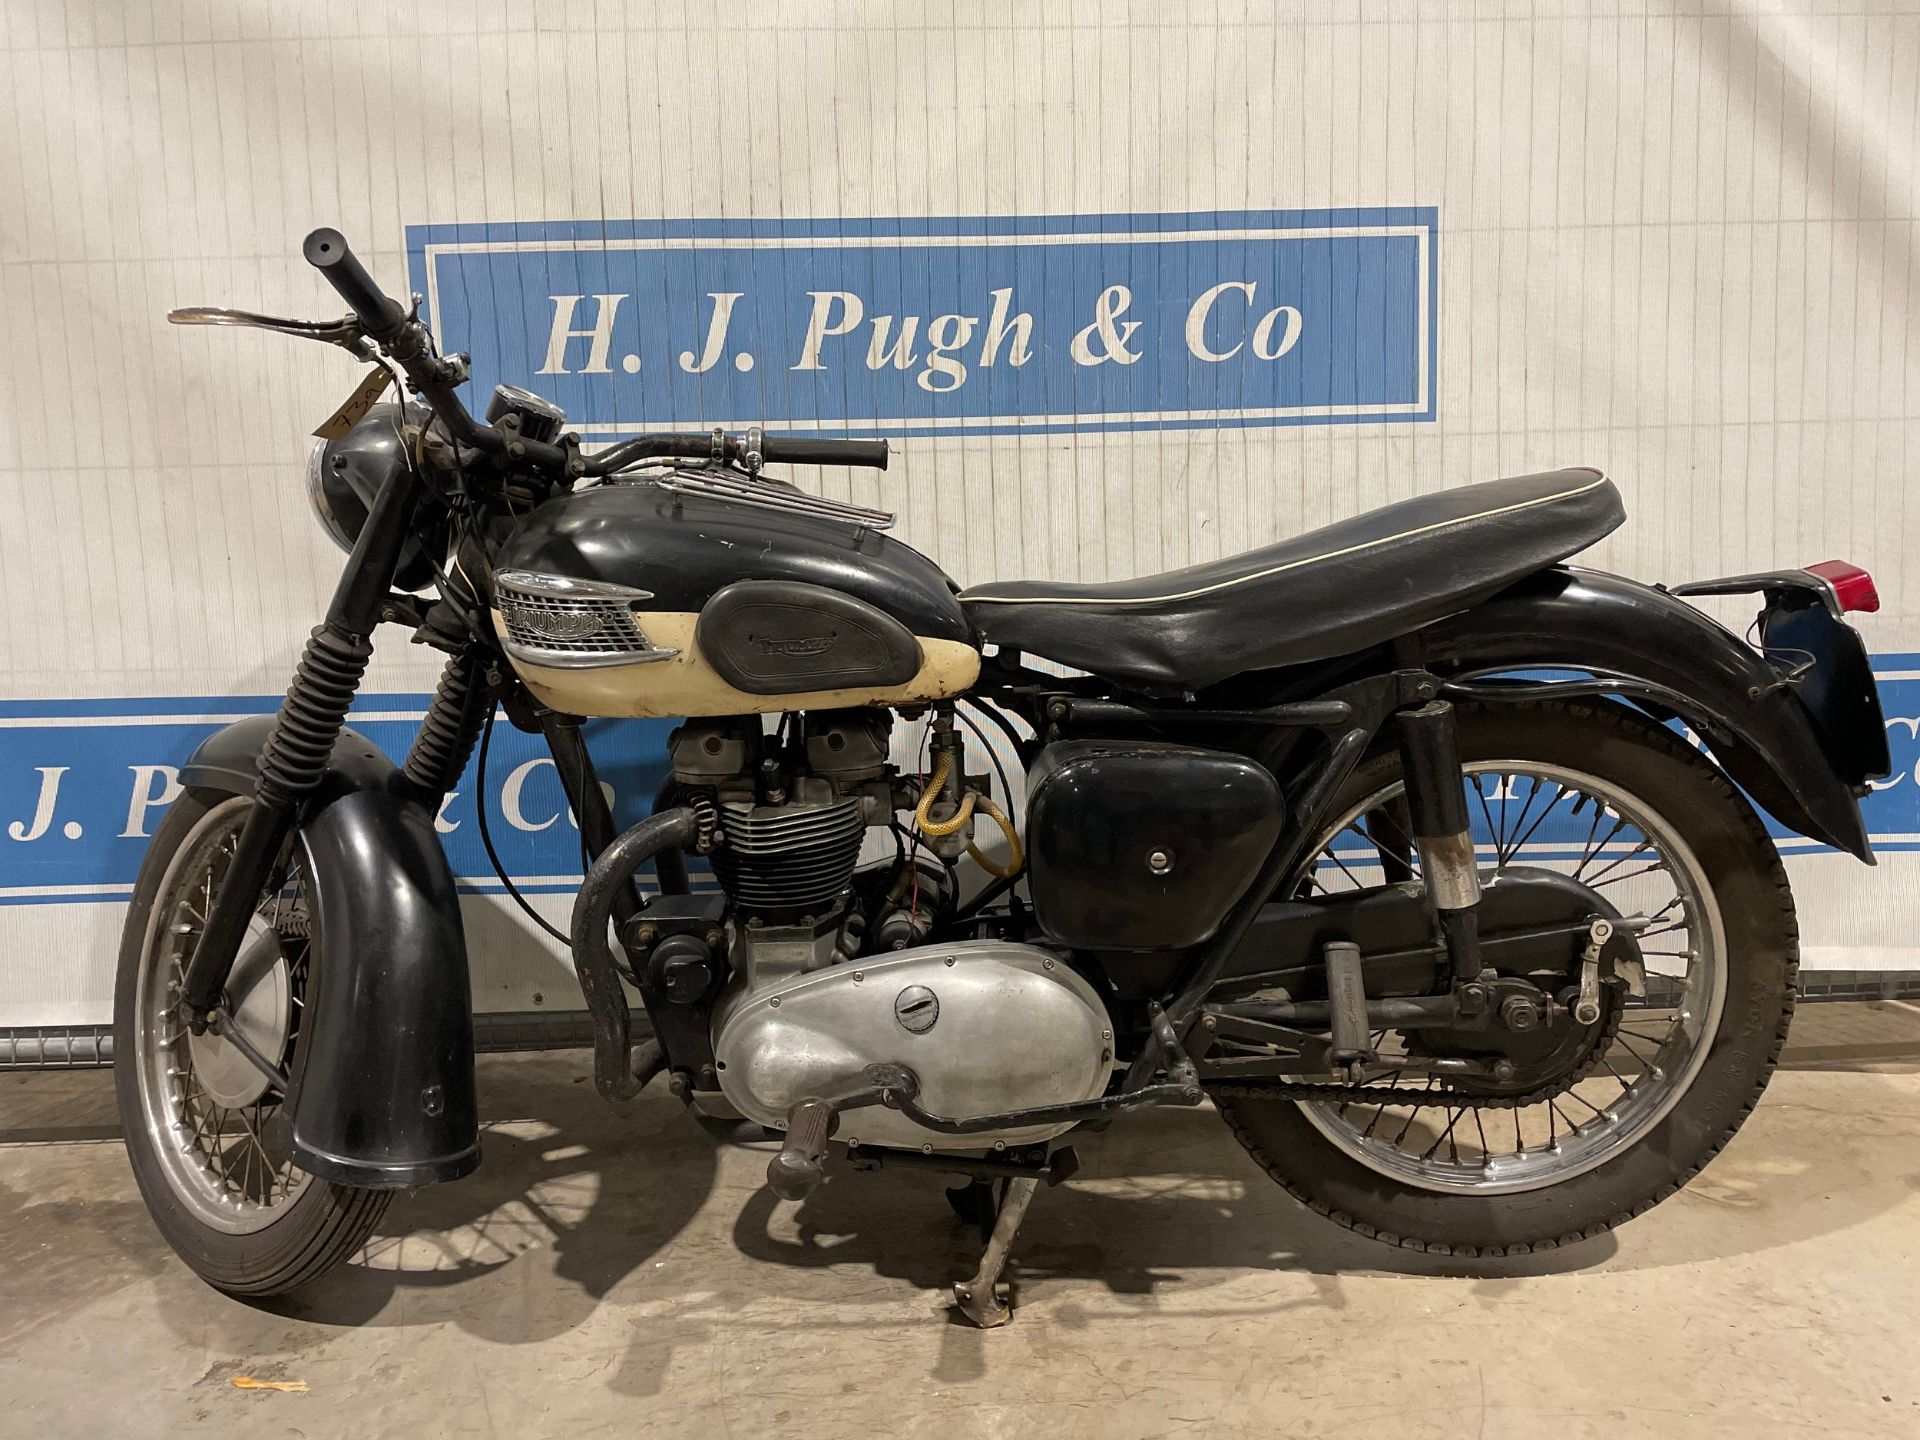 Triumph T110 motorcycle. 1958. 650cc. Easy to ride. C/w some history. Reg 354 XVT. V5 - Image 13 of 14